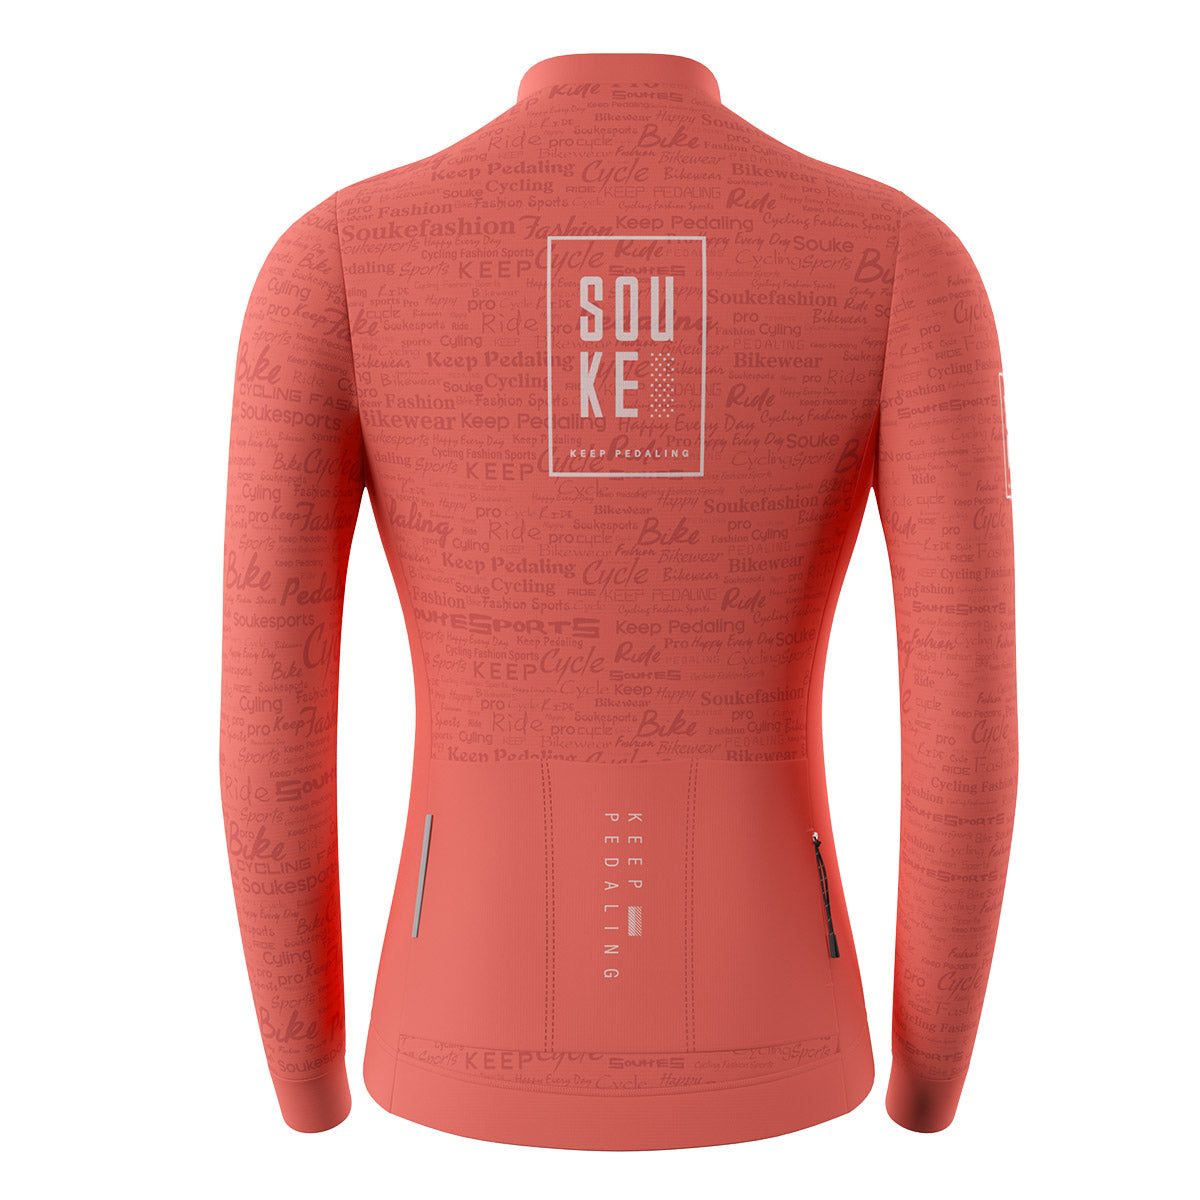 cycling long sleeve jersey, Graphene jersey,jersey for winter,Pink Grapefruit long jersey,jersey for winter and autumn, cold weather jersey (6805616197745)